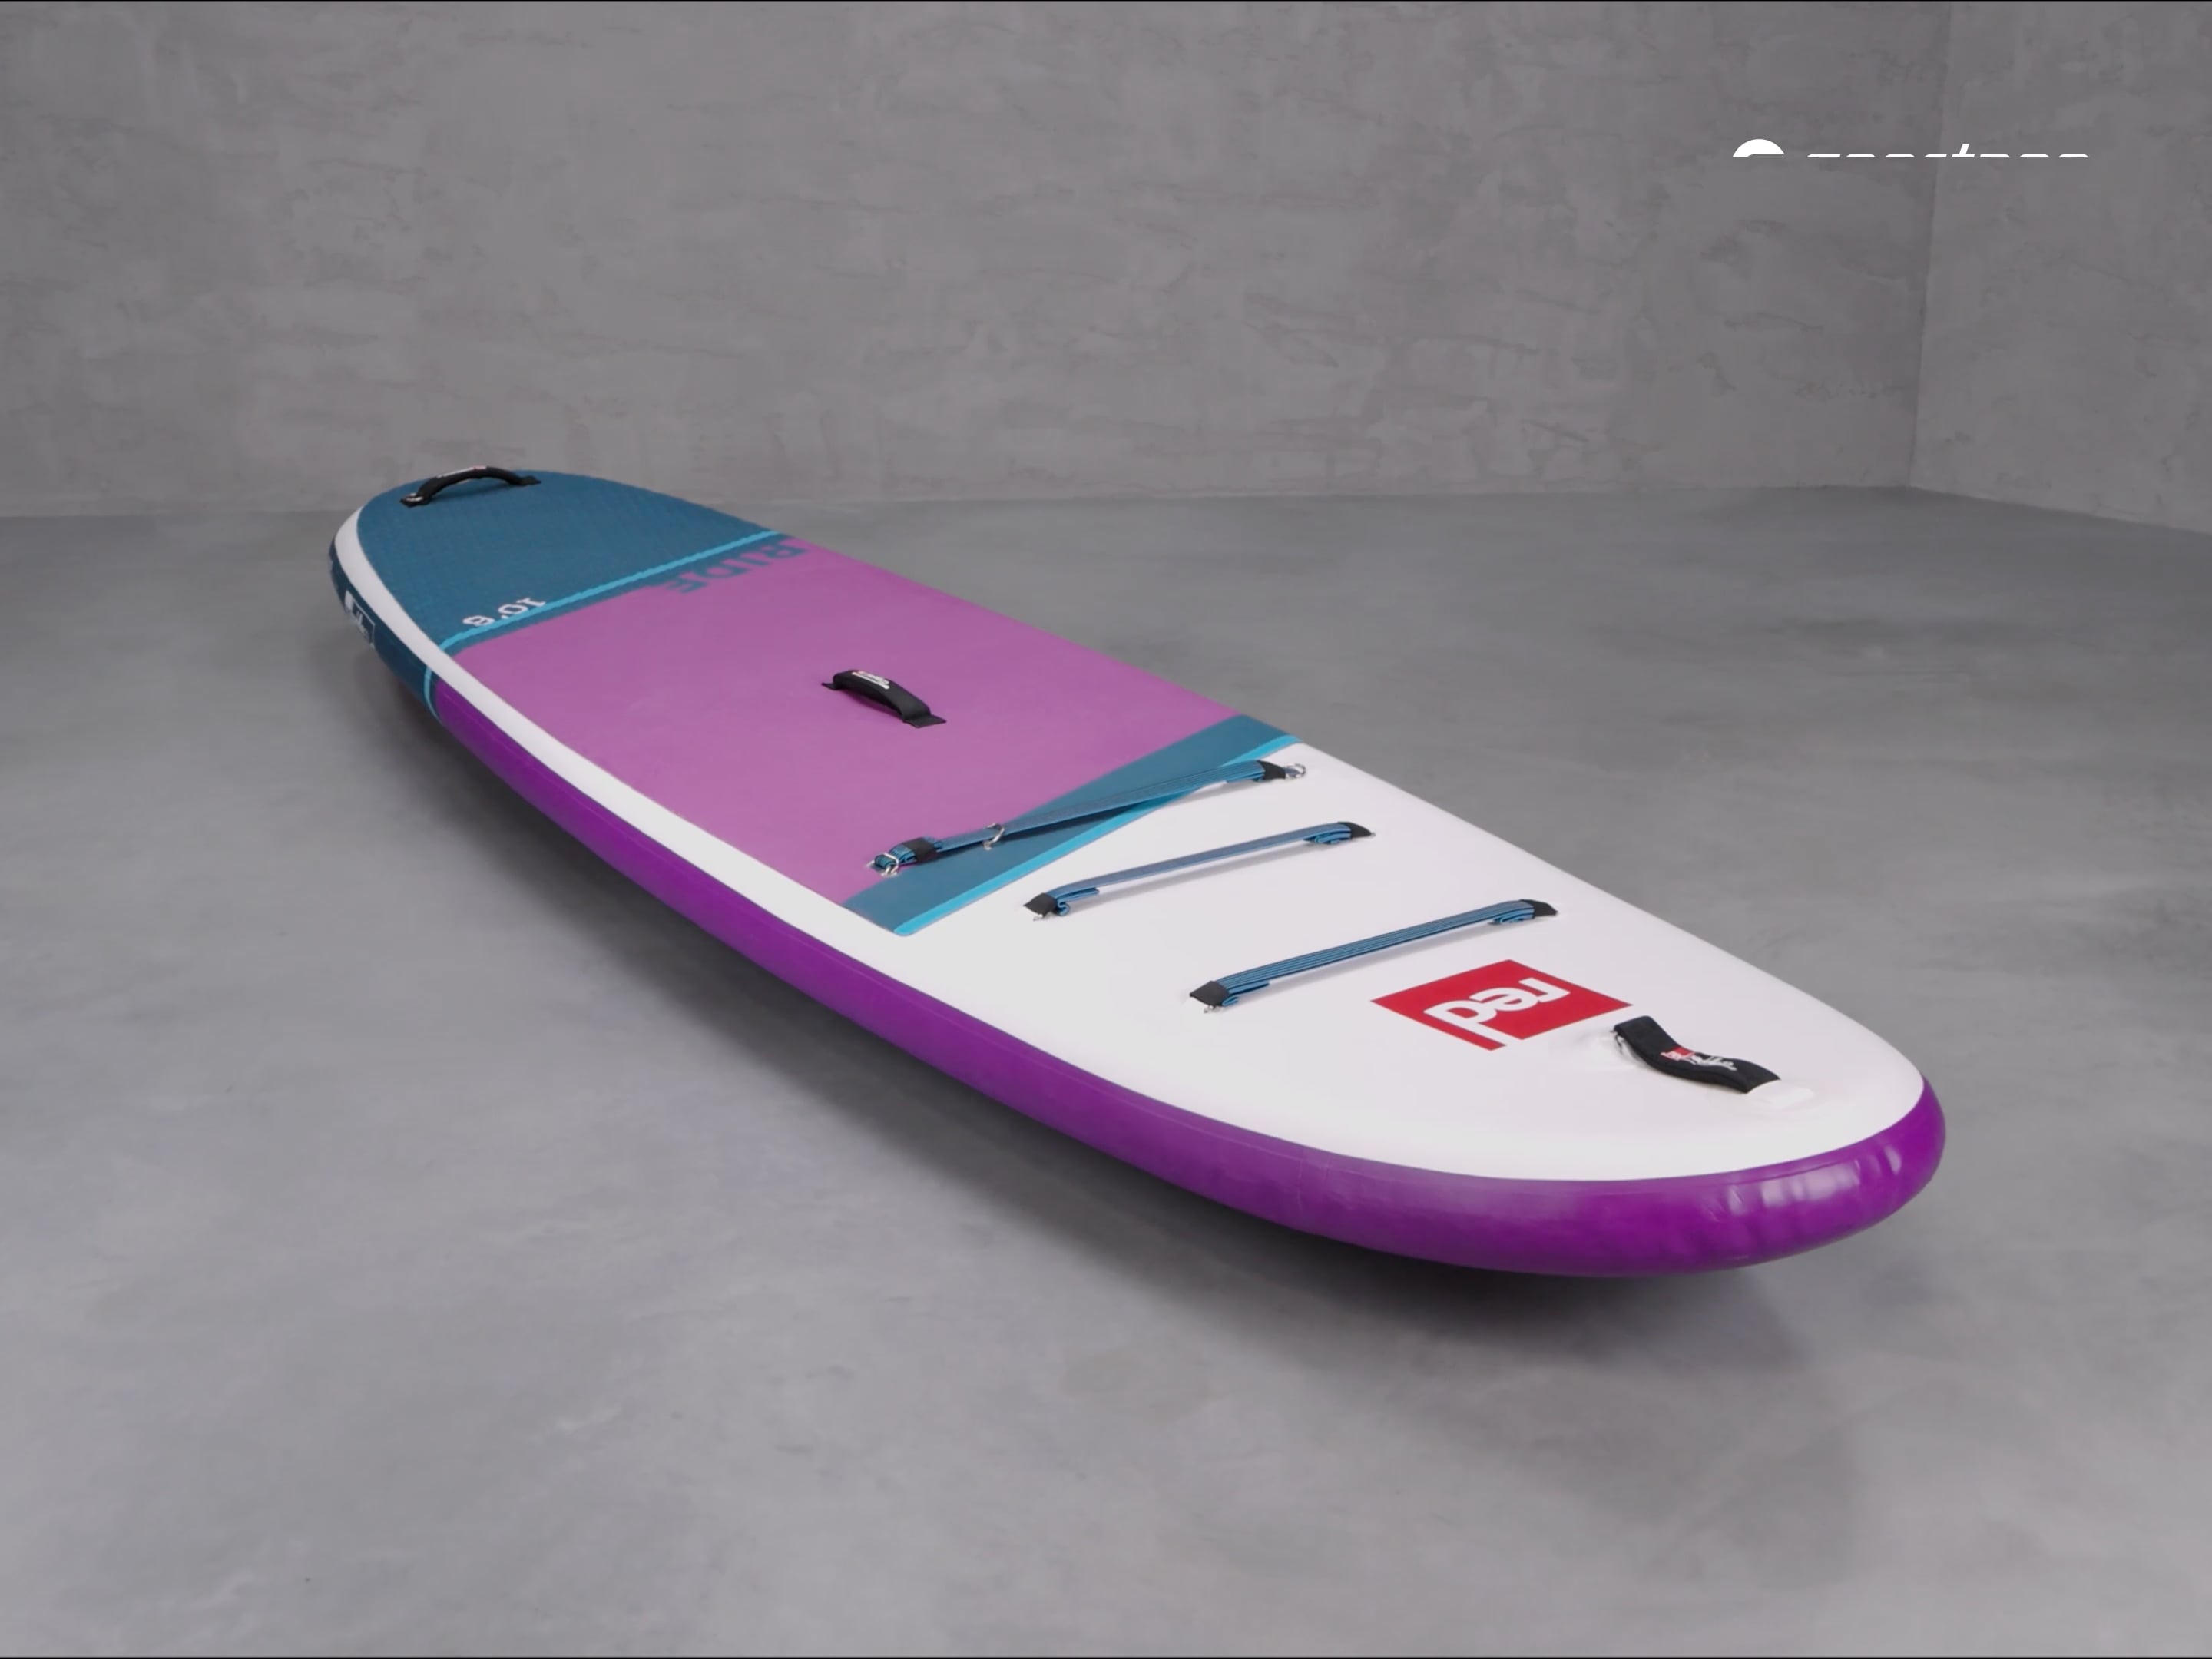 SUP doska Red Paddle Co Ride 10'6" SE purple 17611